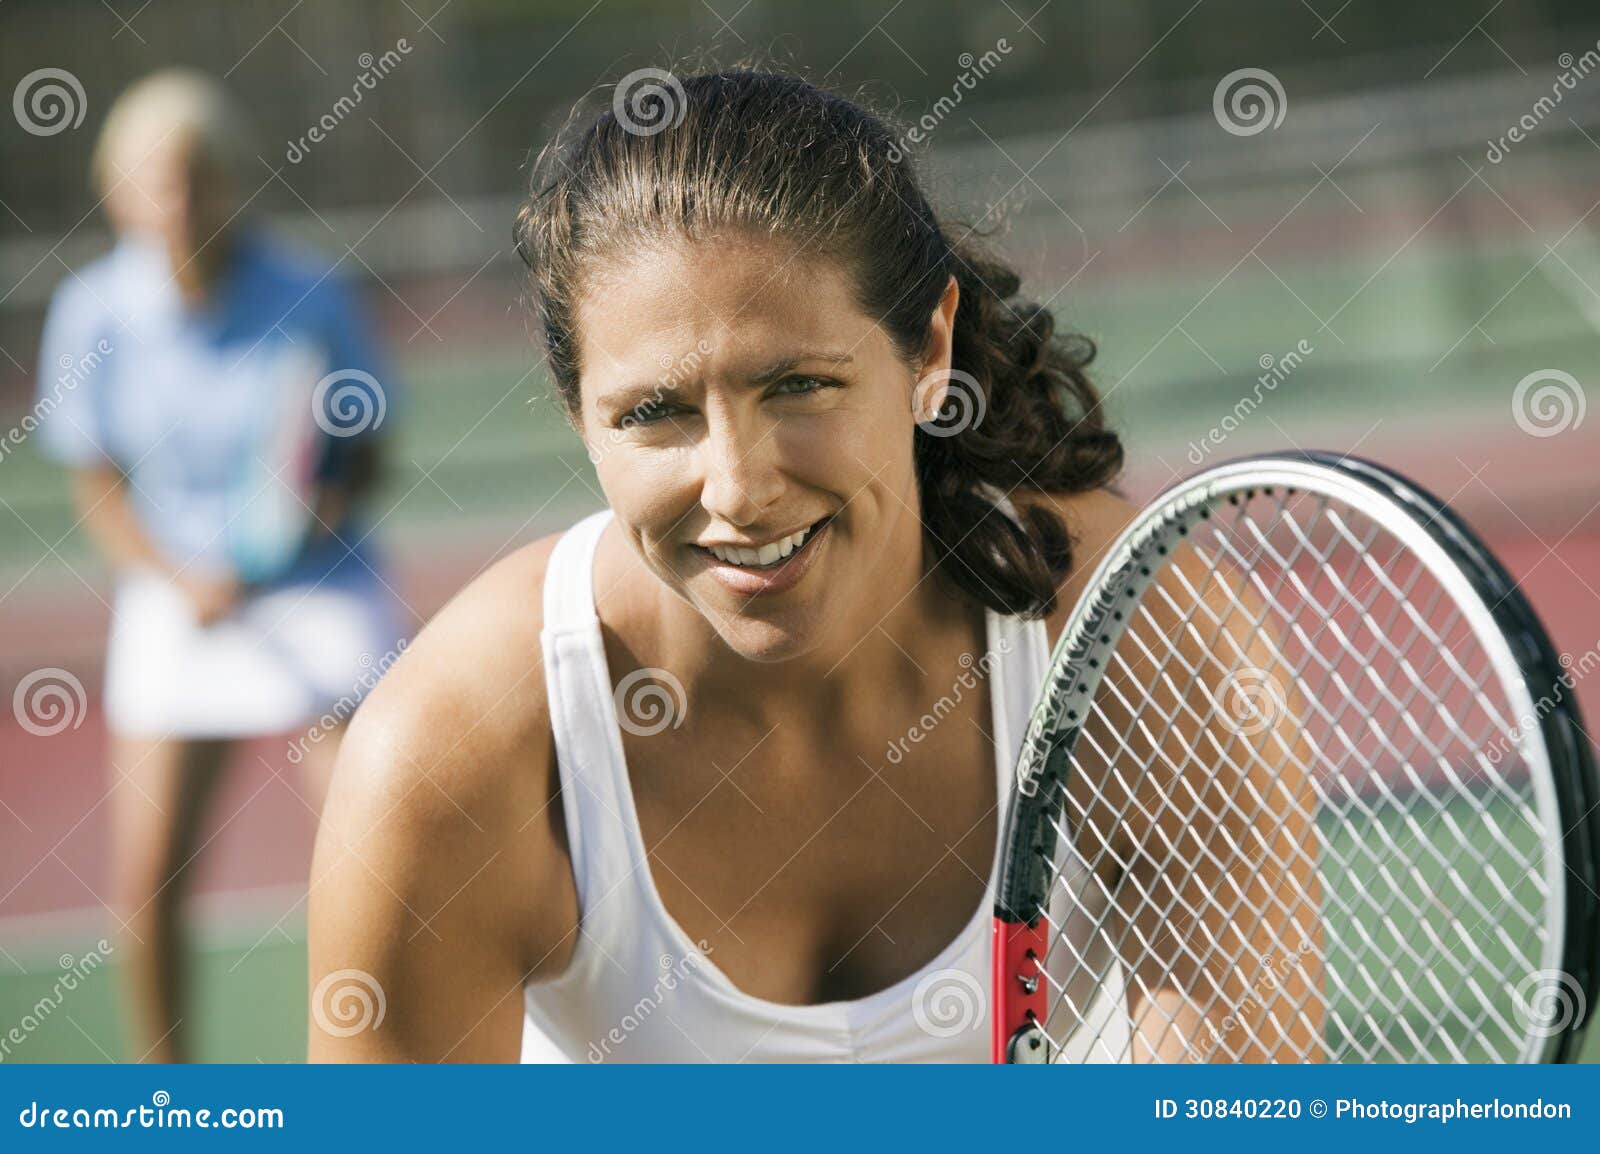 Female Doubles Tennis Players Waiting For Serve Focus On Foreground Close Up Stock Photo Image Of Game Hispanics